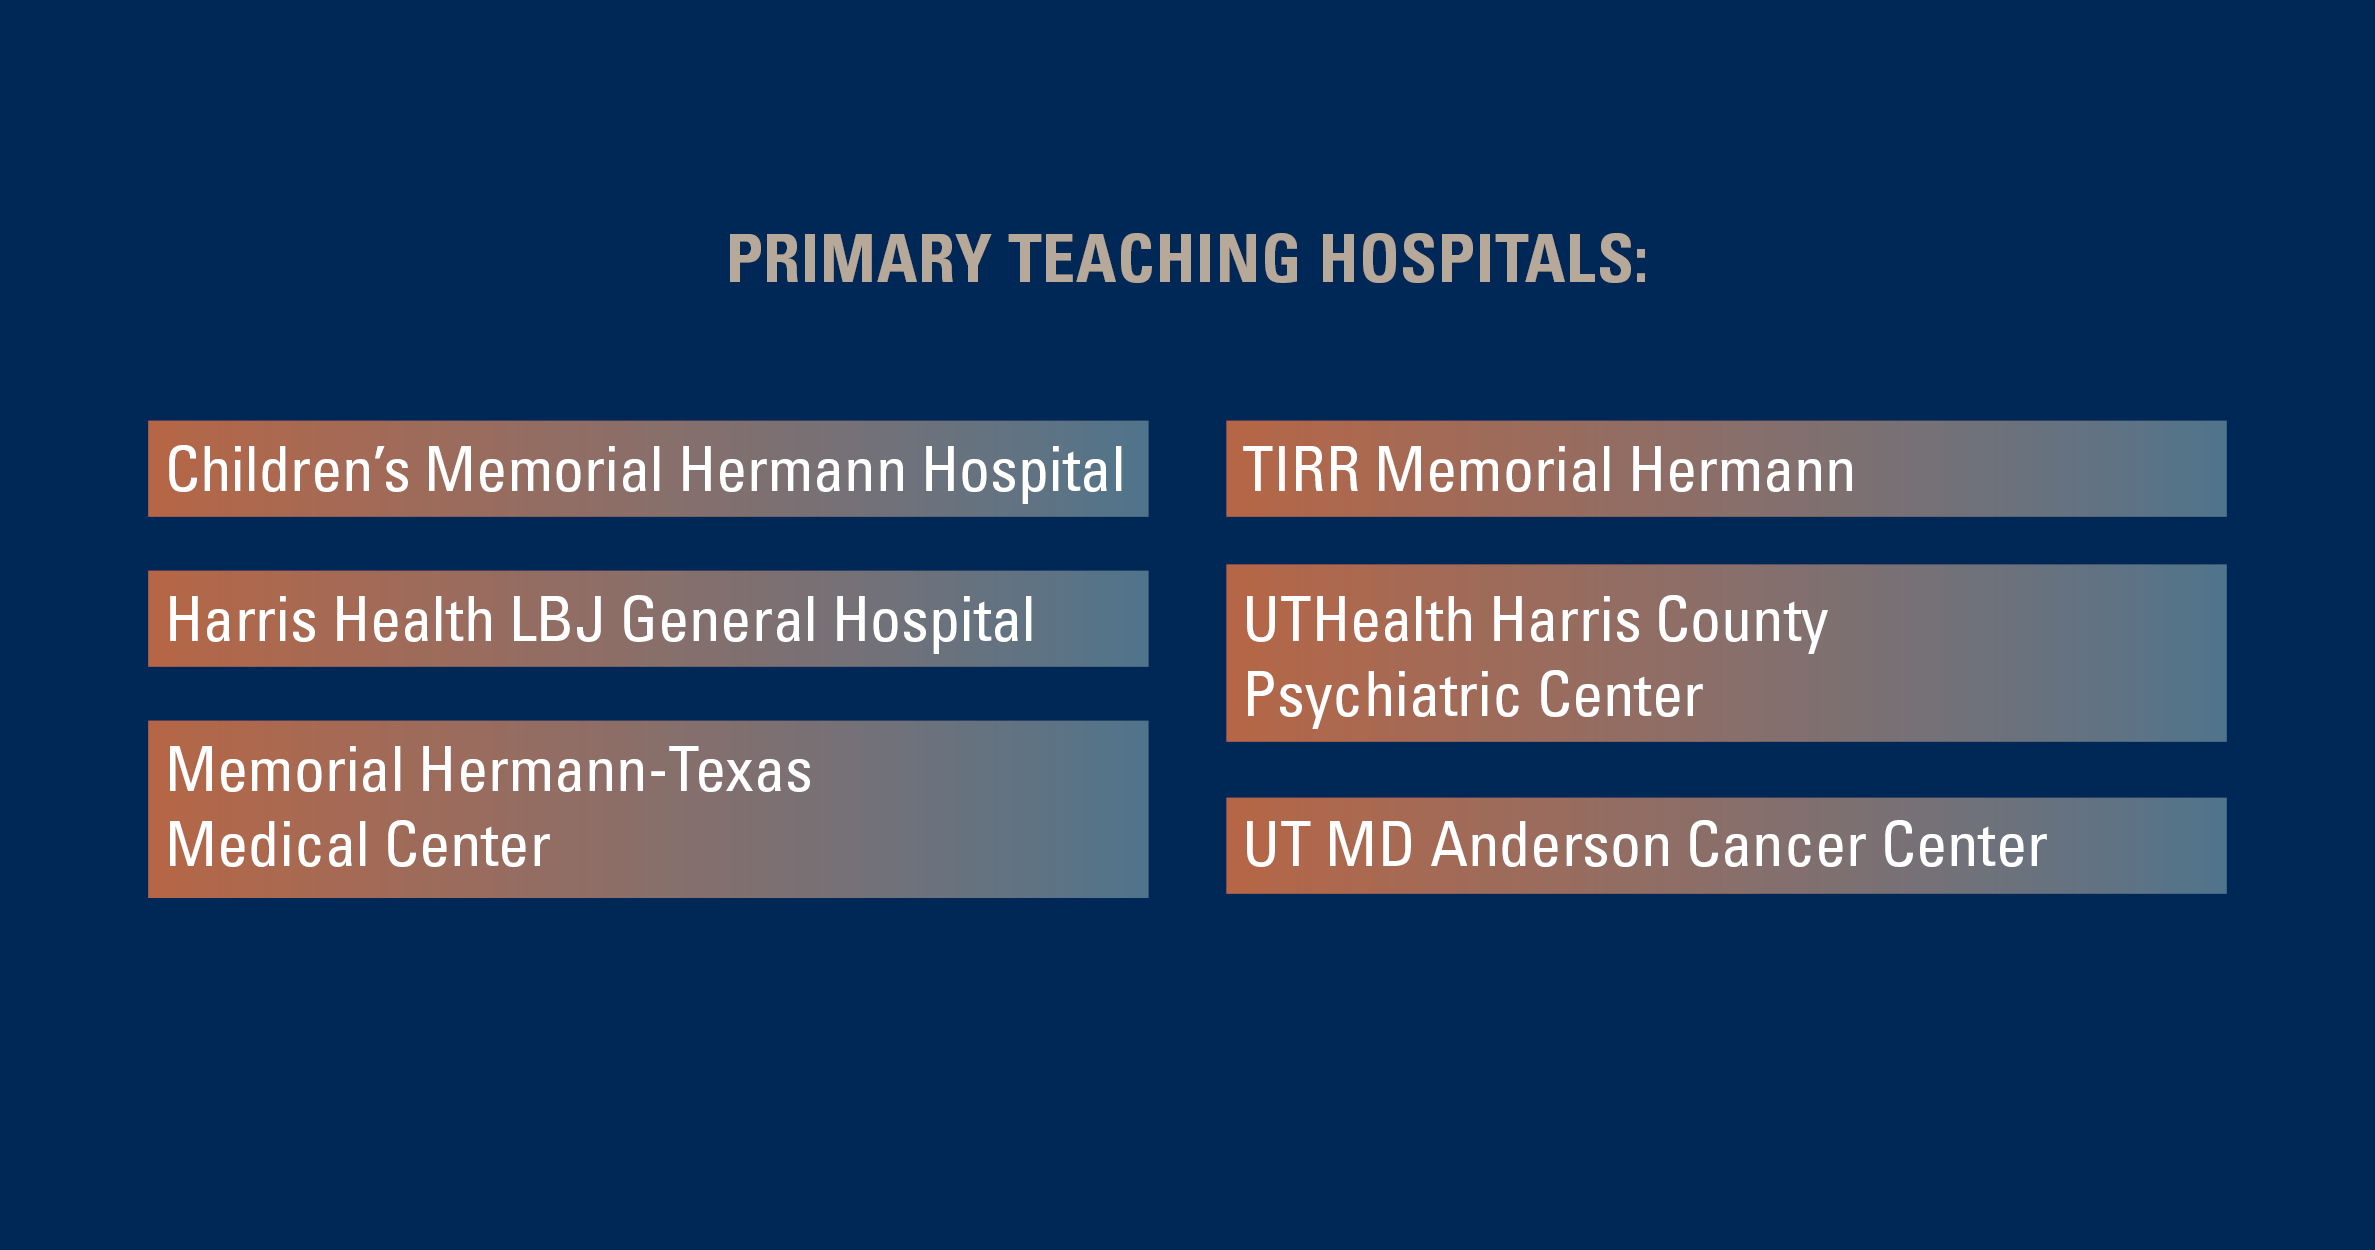 List of primary teaching hospitals including Children's Memorial Hermann Hospital, Harris Health LBJ General Hospital, Memorial Hermann - TMC, TIRR Memorial Hermann, UTHealth Harris County Psychiatric Center and UT MD Anderson Cancer Center